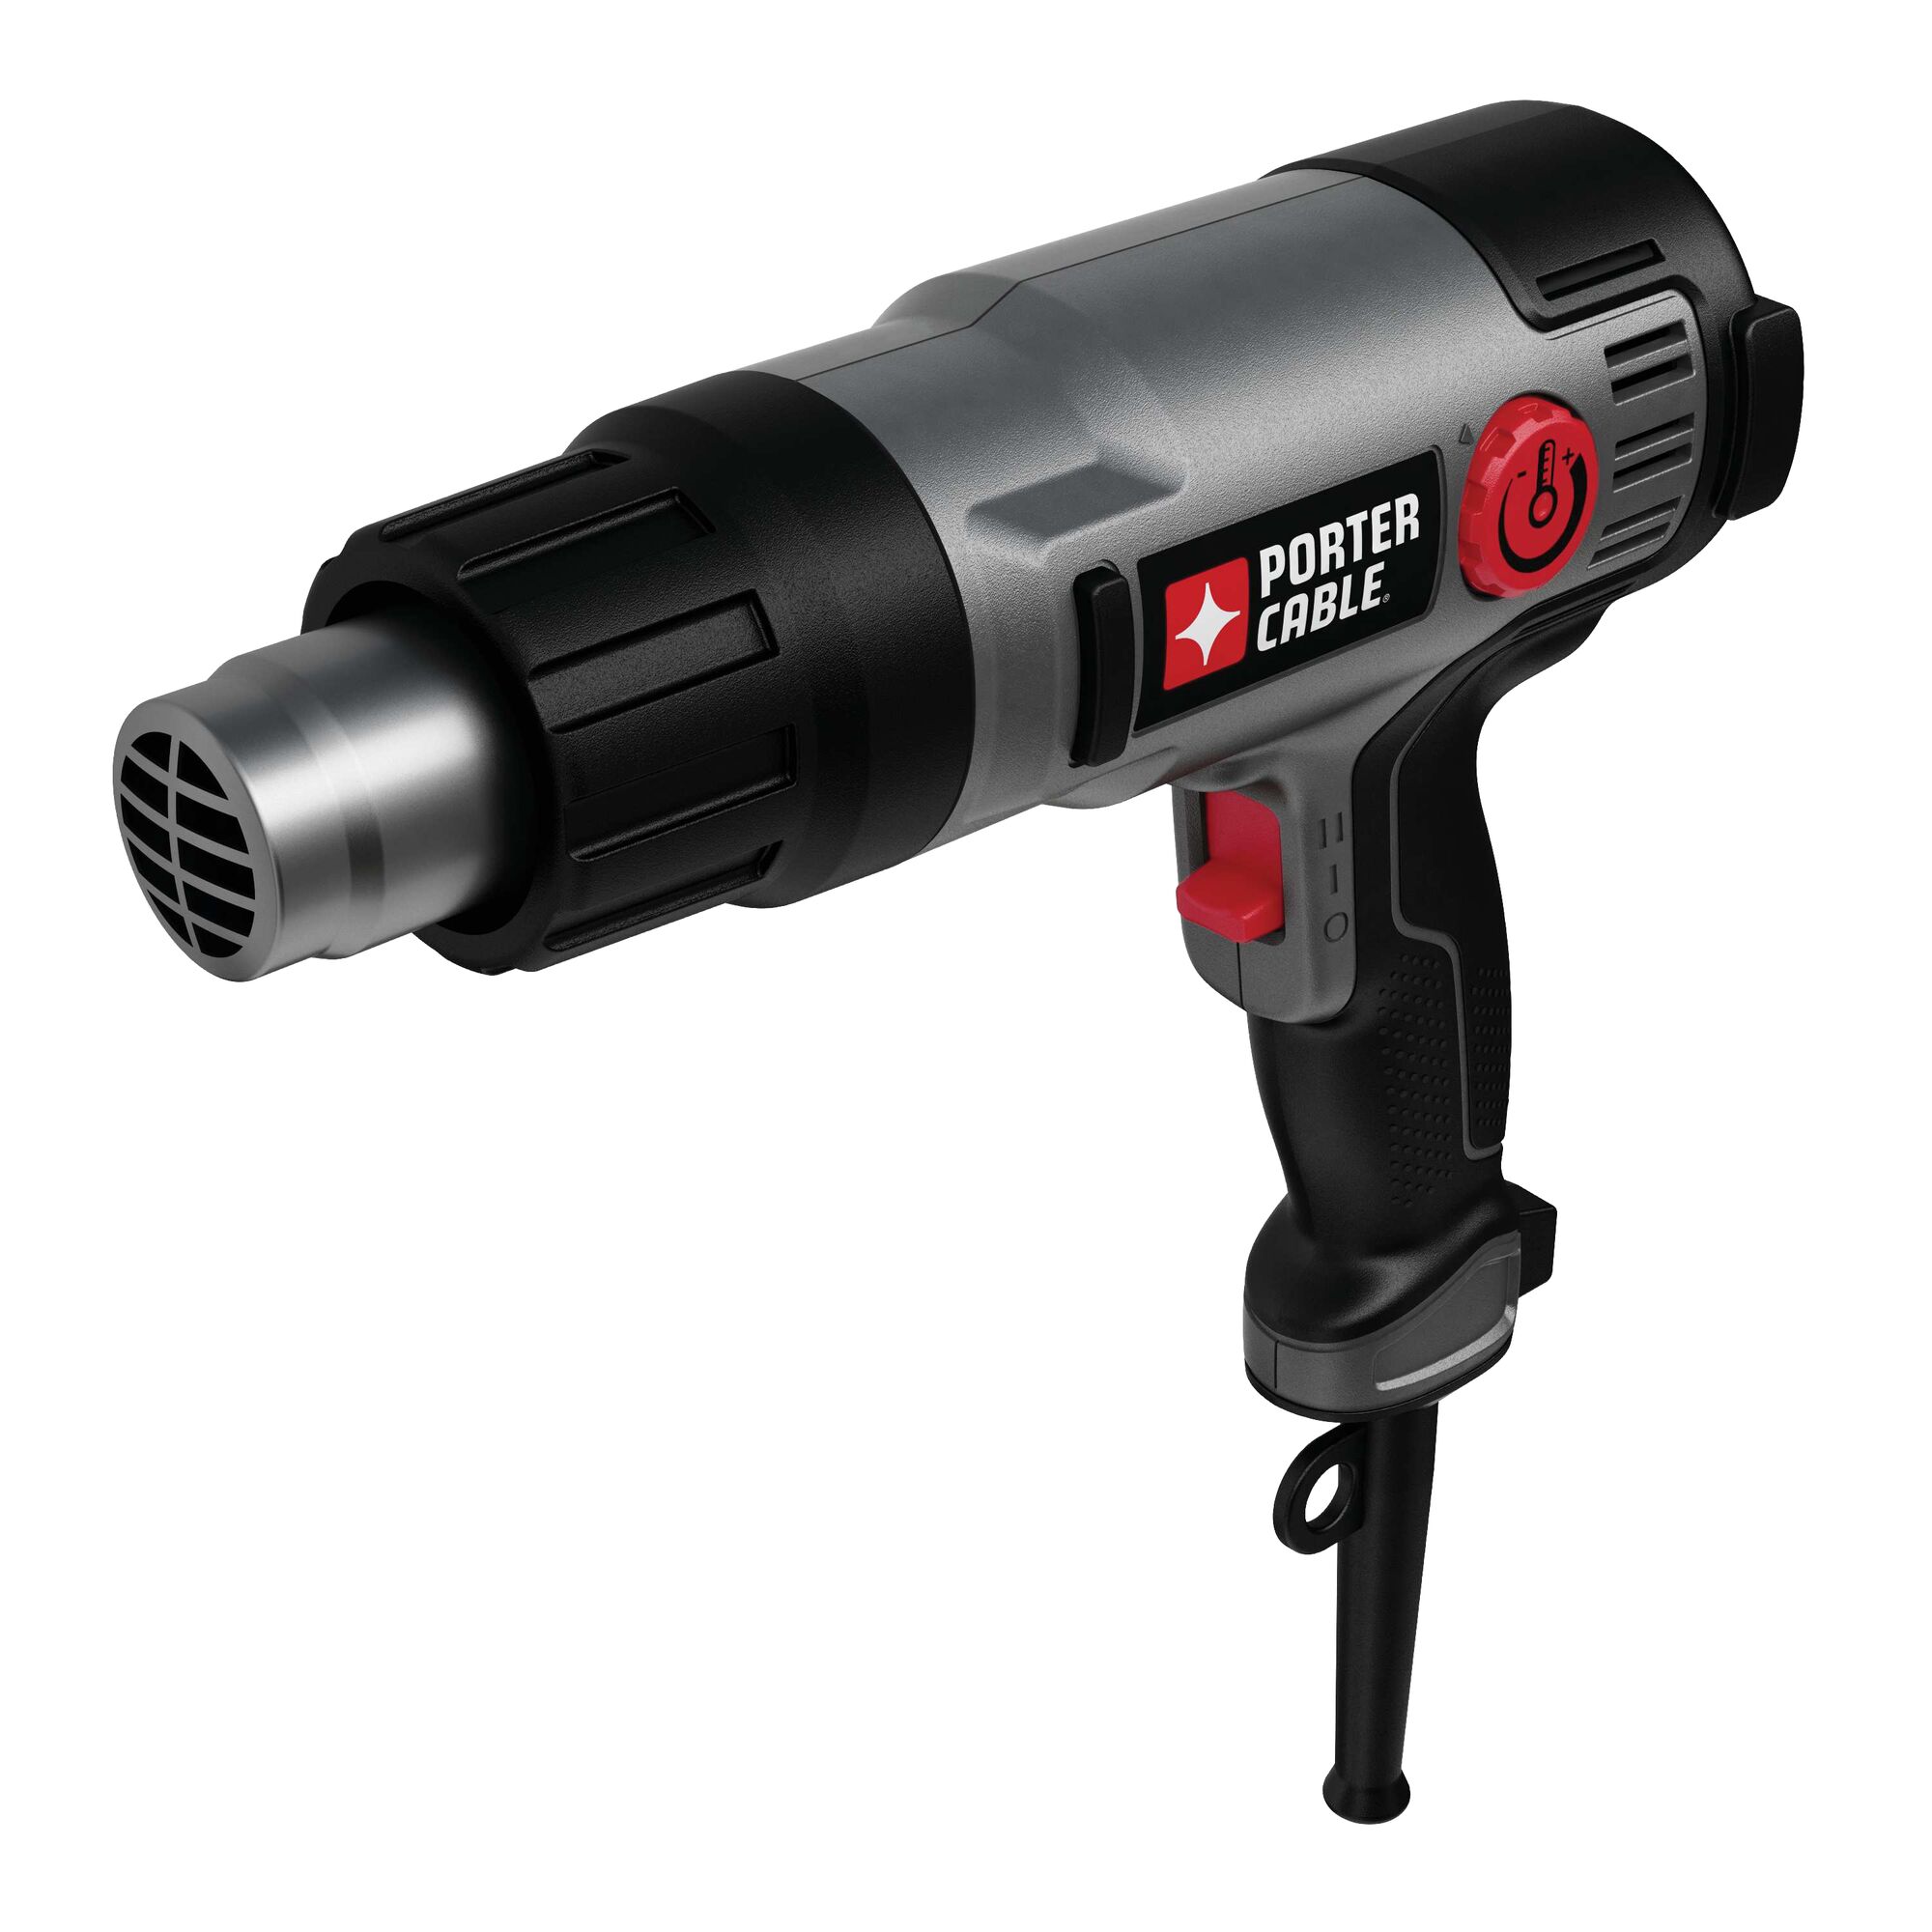 Top 5 Best Heat Gun For Epoxy Resin [Review] - Tool for Making